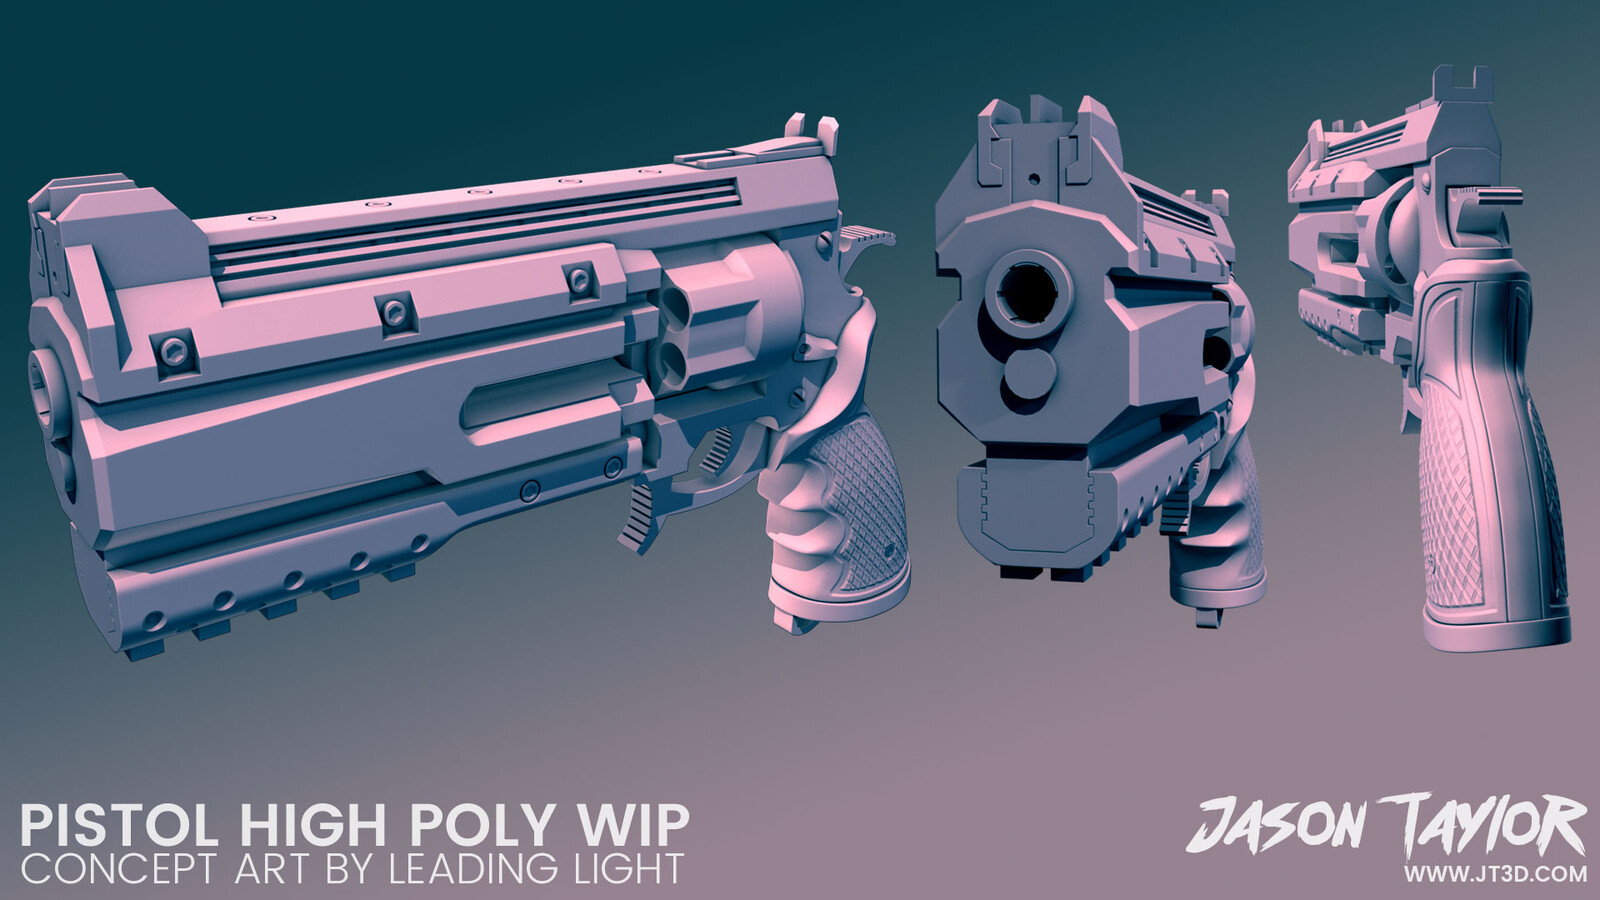 High poly model. Concept art by Leading Light.